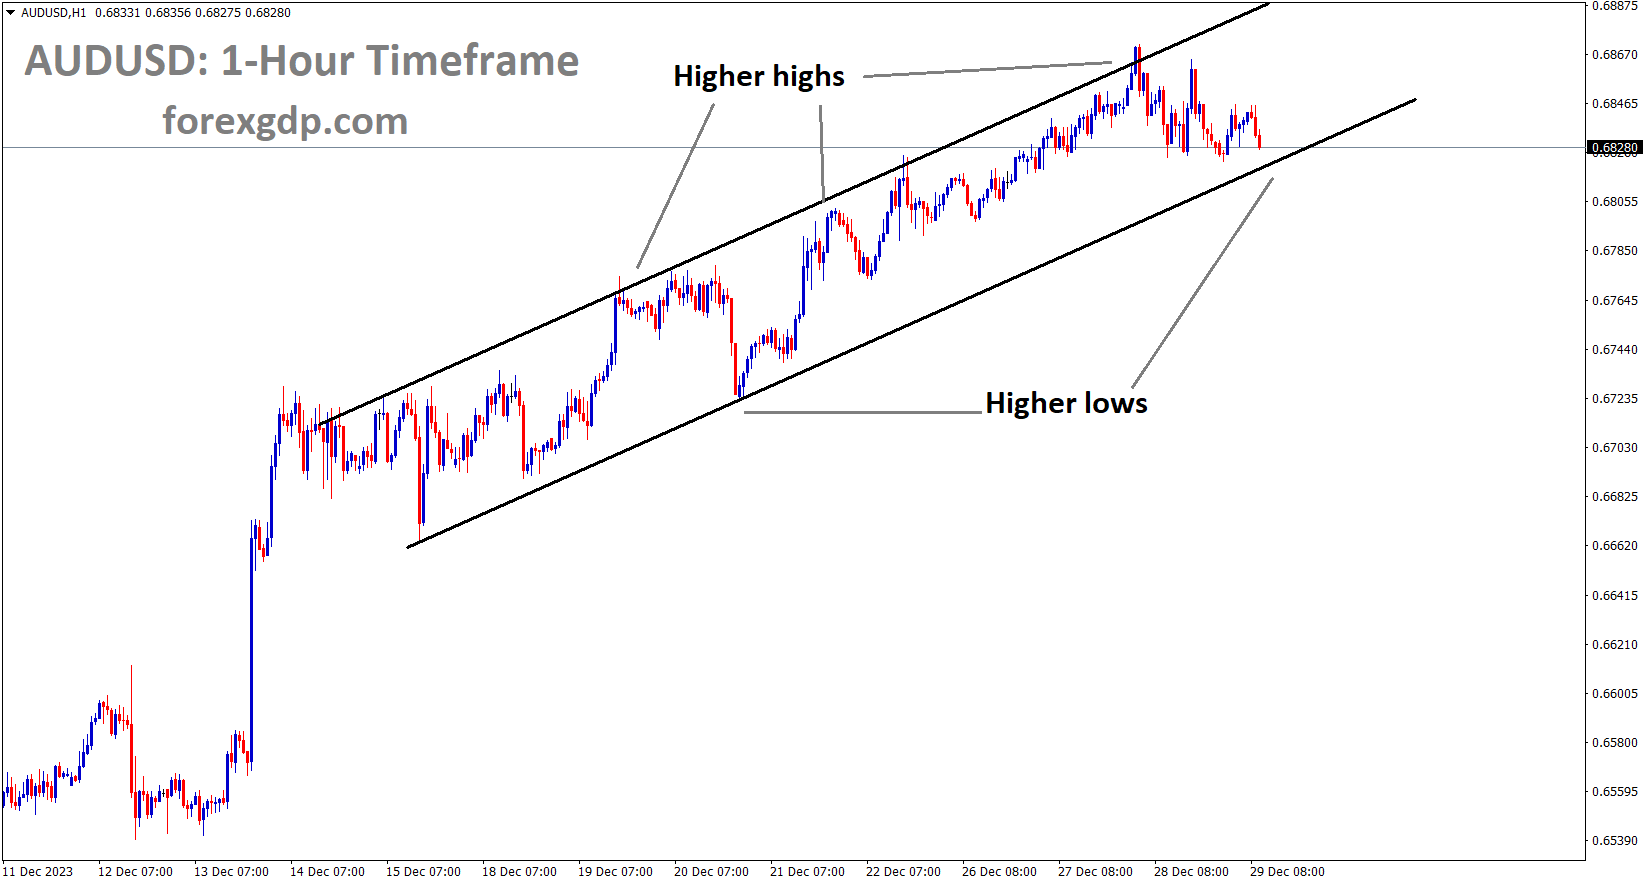 AUDUSD is moving in an Ascending channel and the market has reached the higher low area of the channel